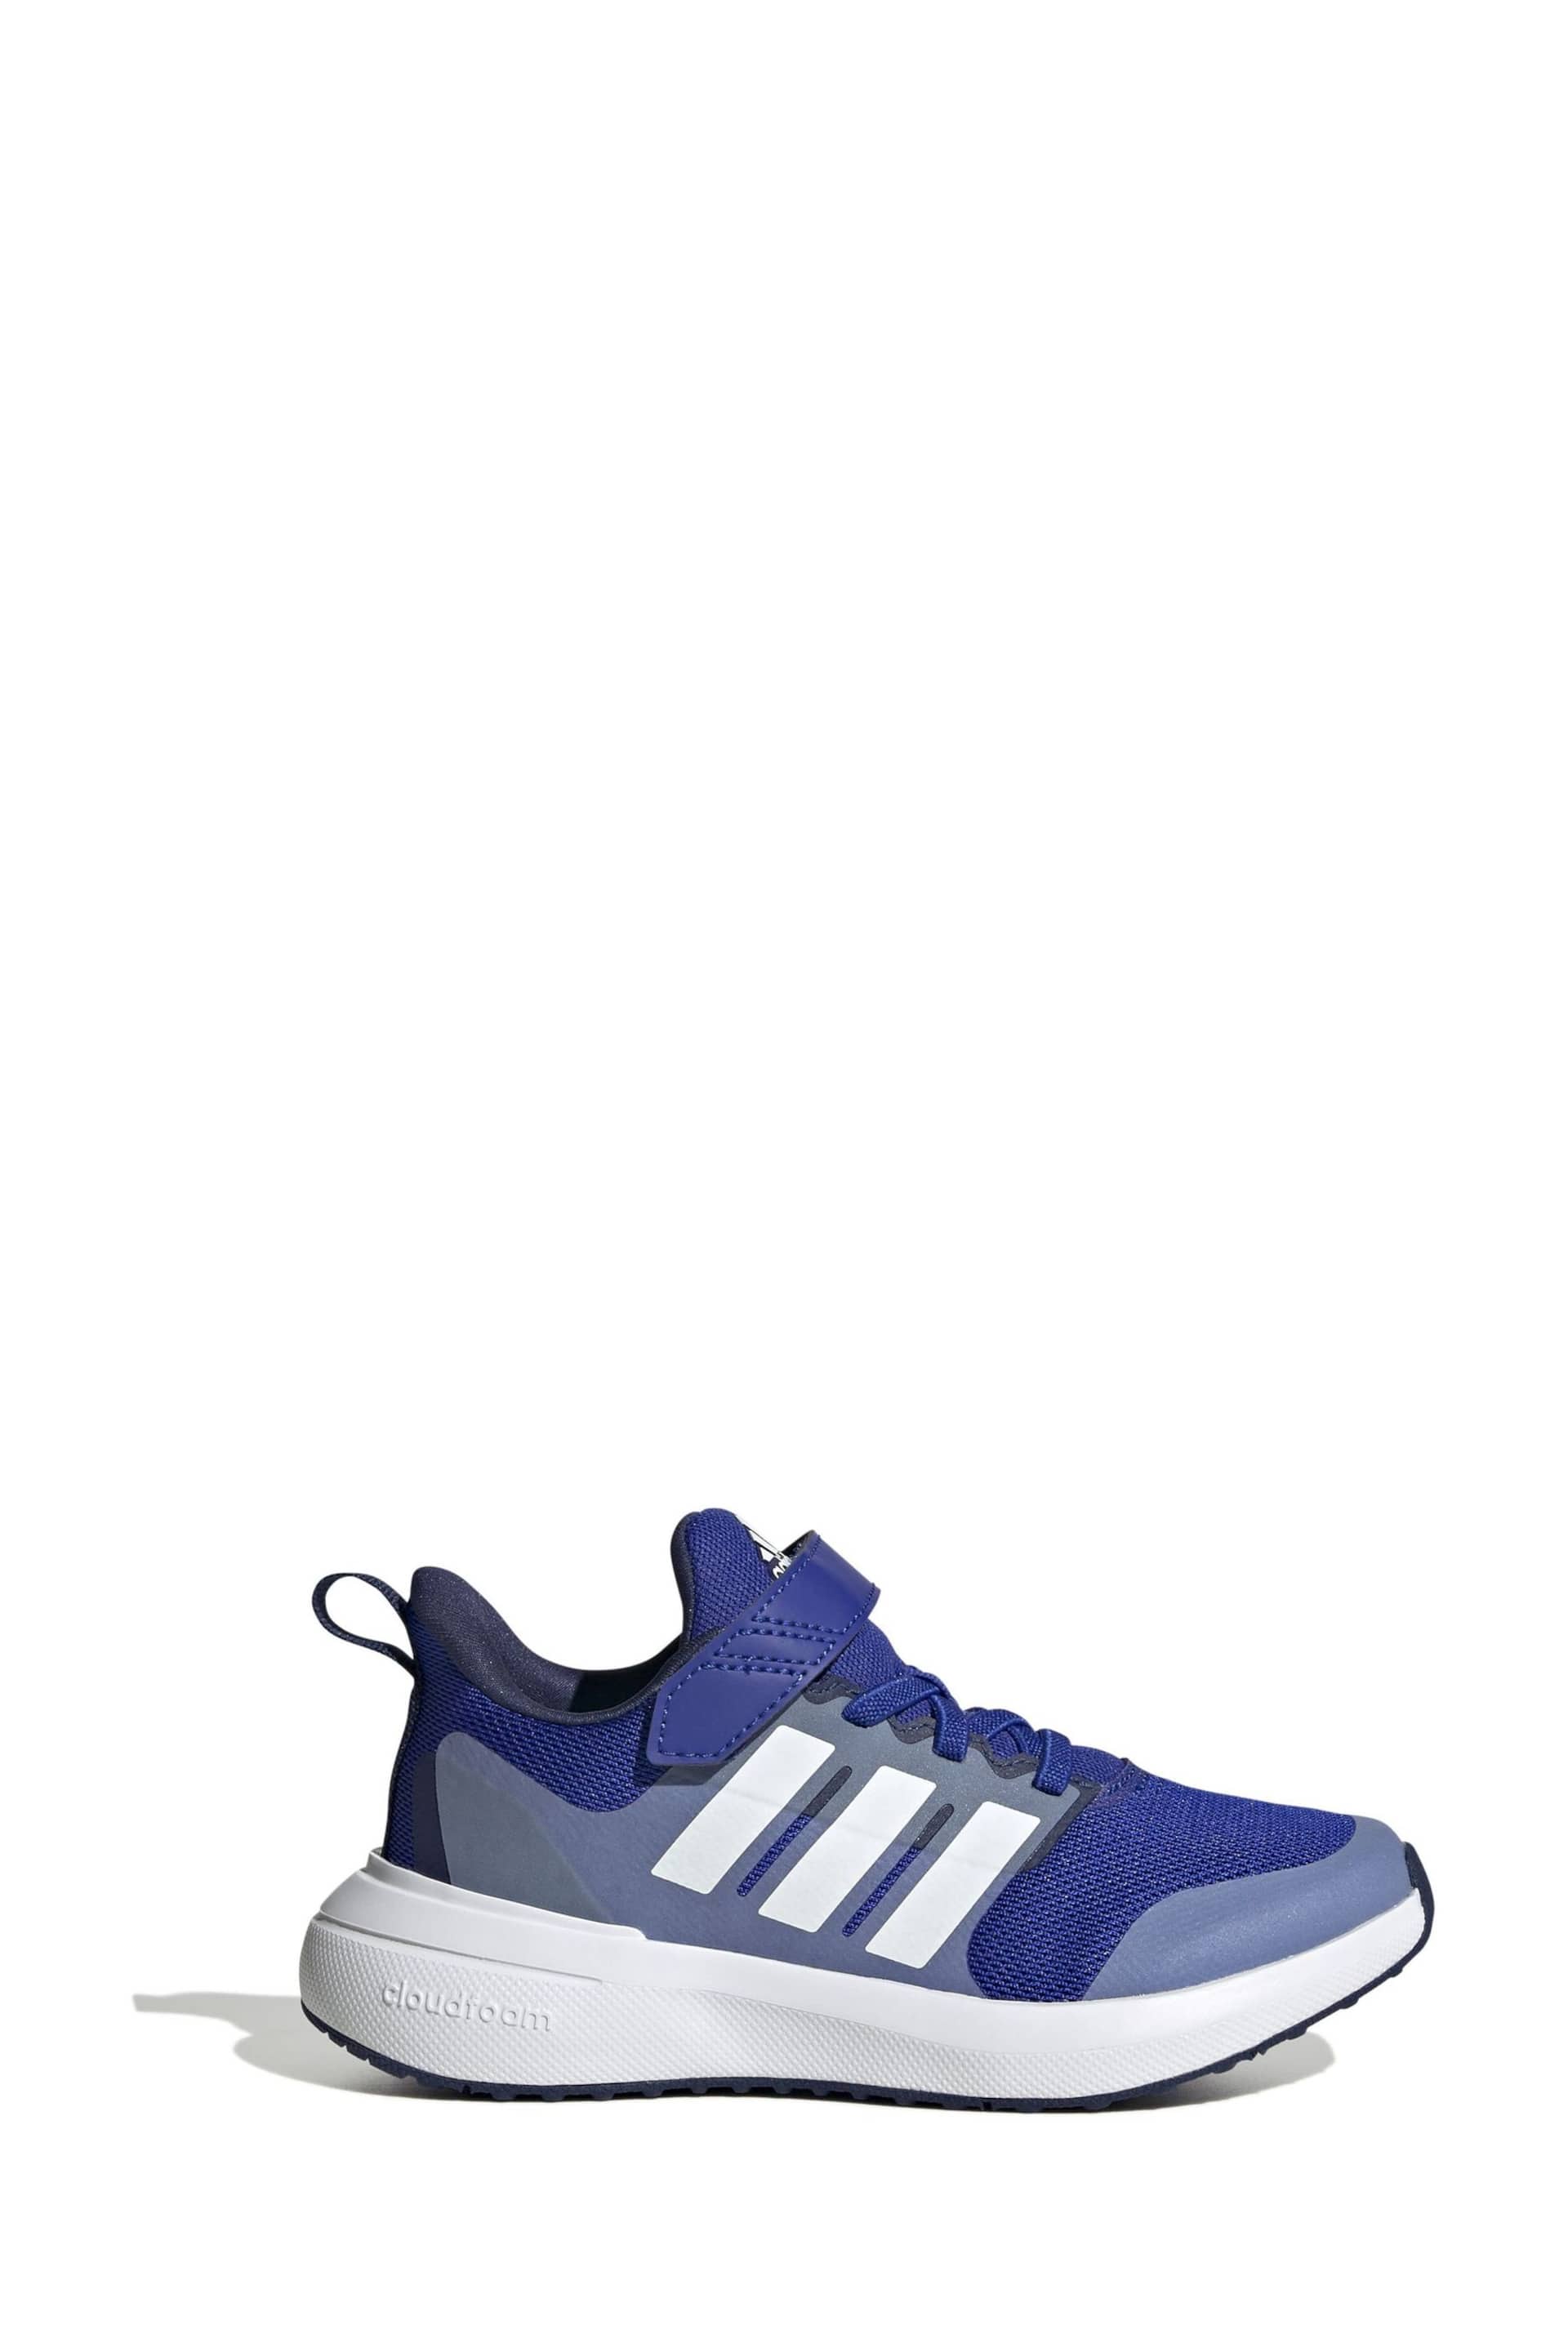 adidas Blue/White Kids Sportswear Fortarun 2.0 Cloudfoam Elastic Lace Top Strap Trainers - Image 1 of 8